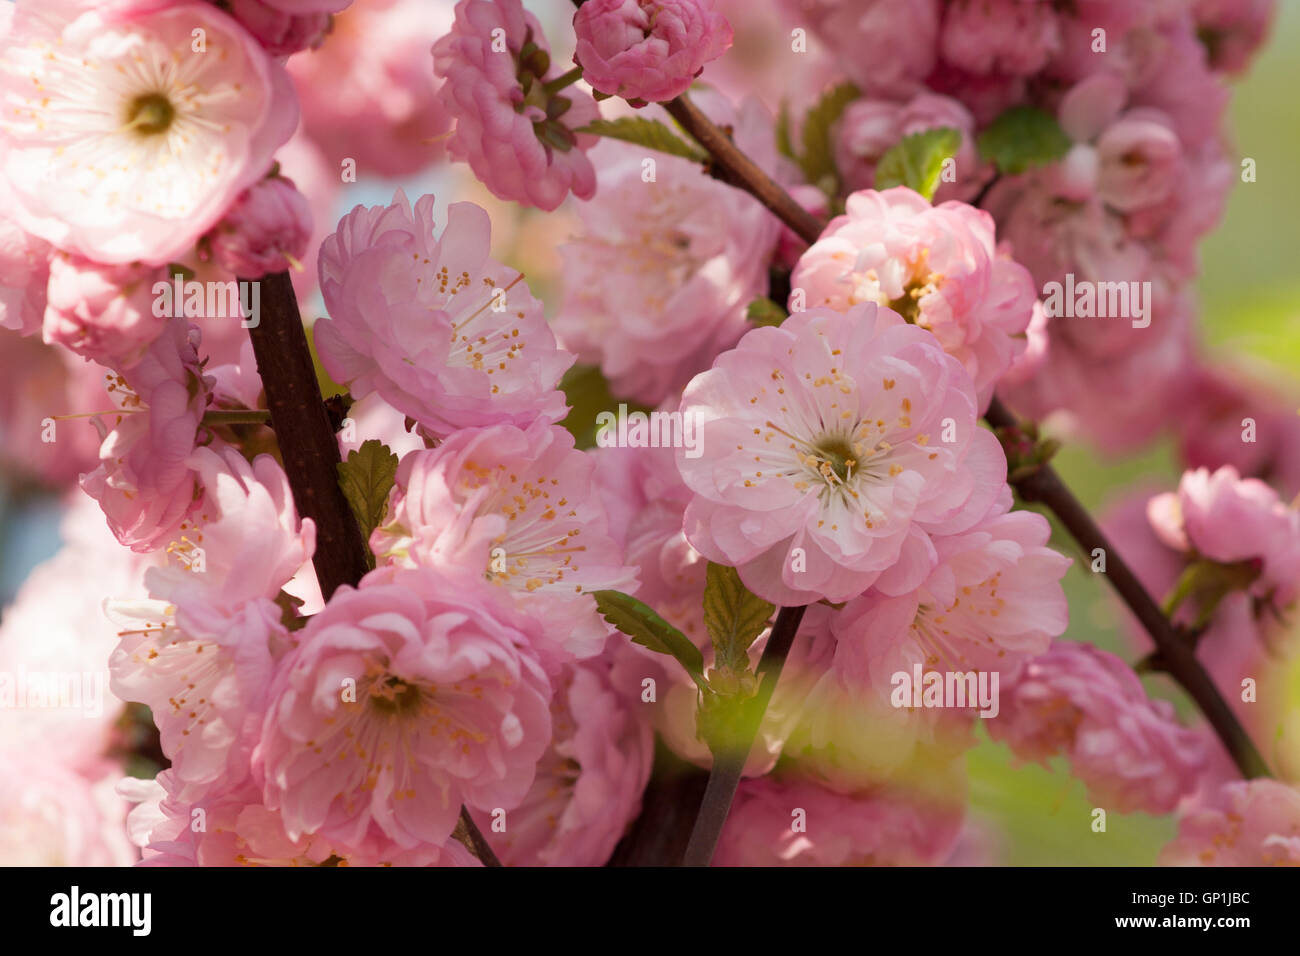 Blossoms of flowering plum shrubs also known as flowering almond. Pink festive flowers Stock Photo